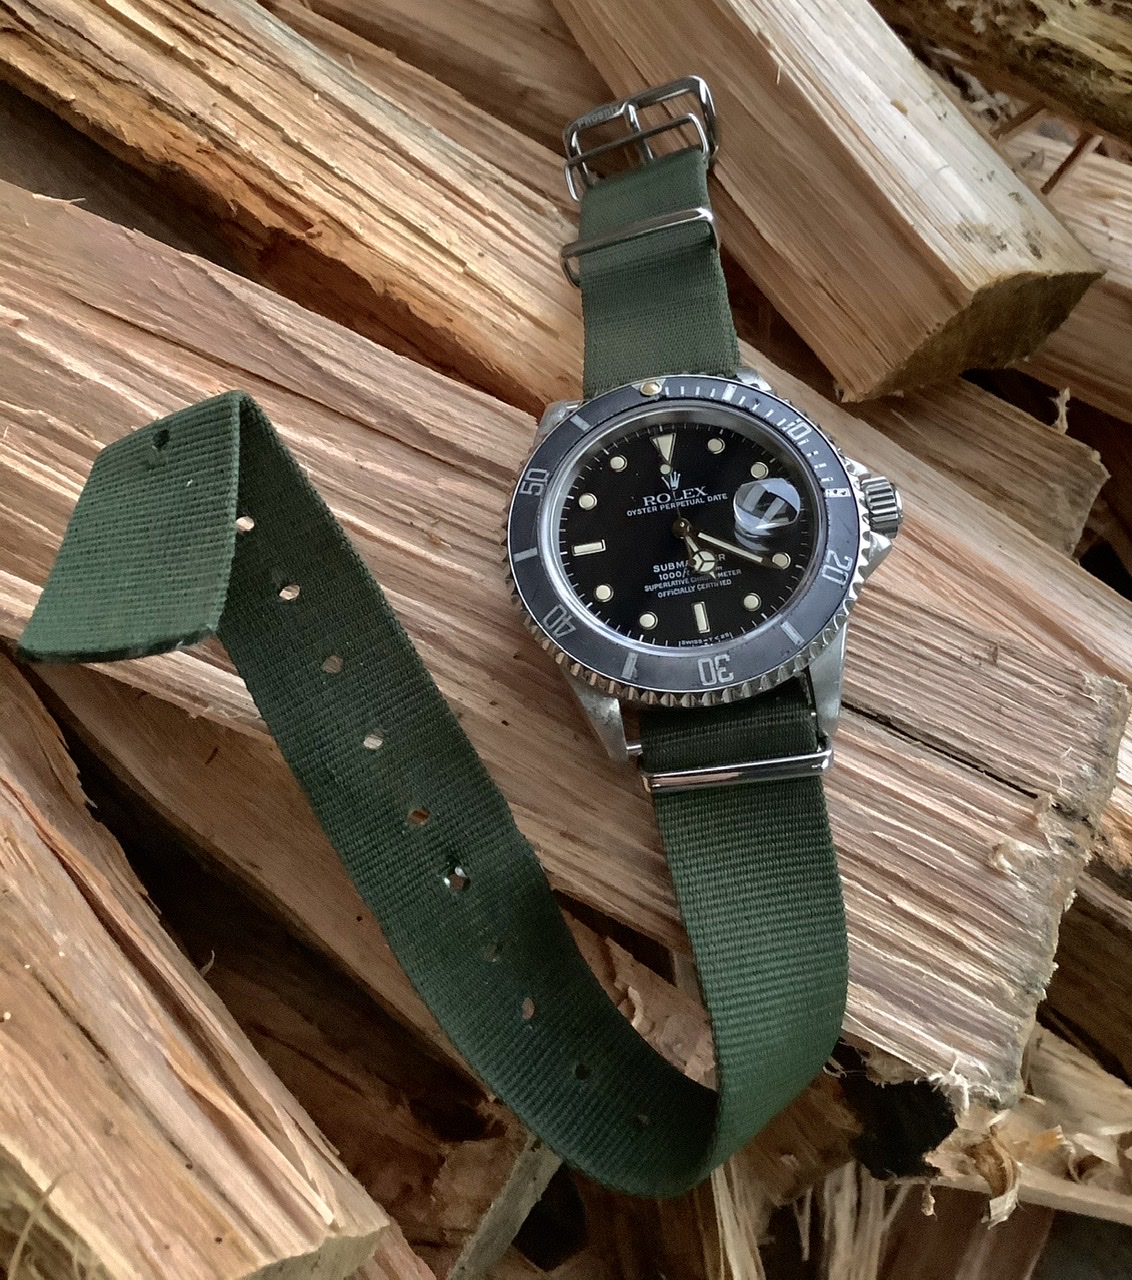 Owner Review: Rolex Submariner 16800 - FIFTH WRIST